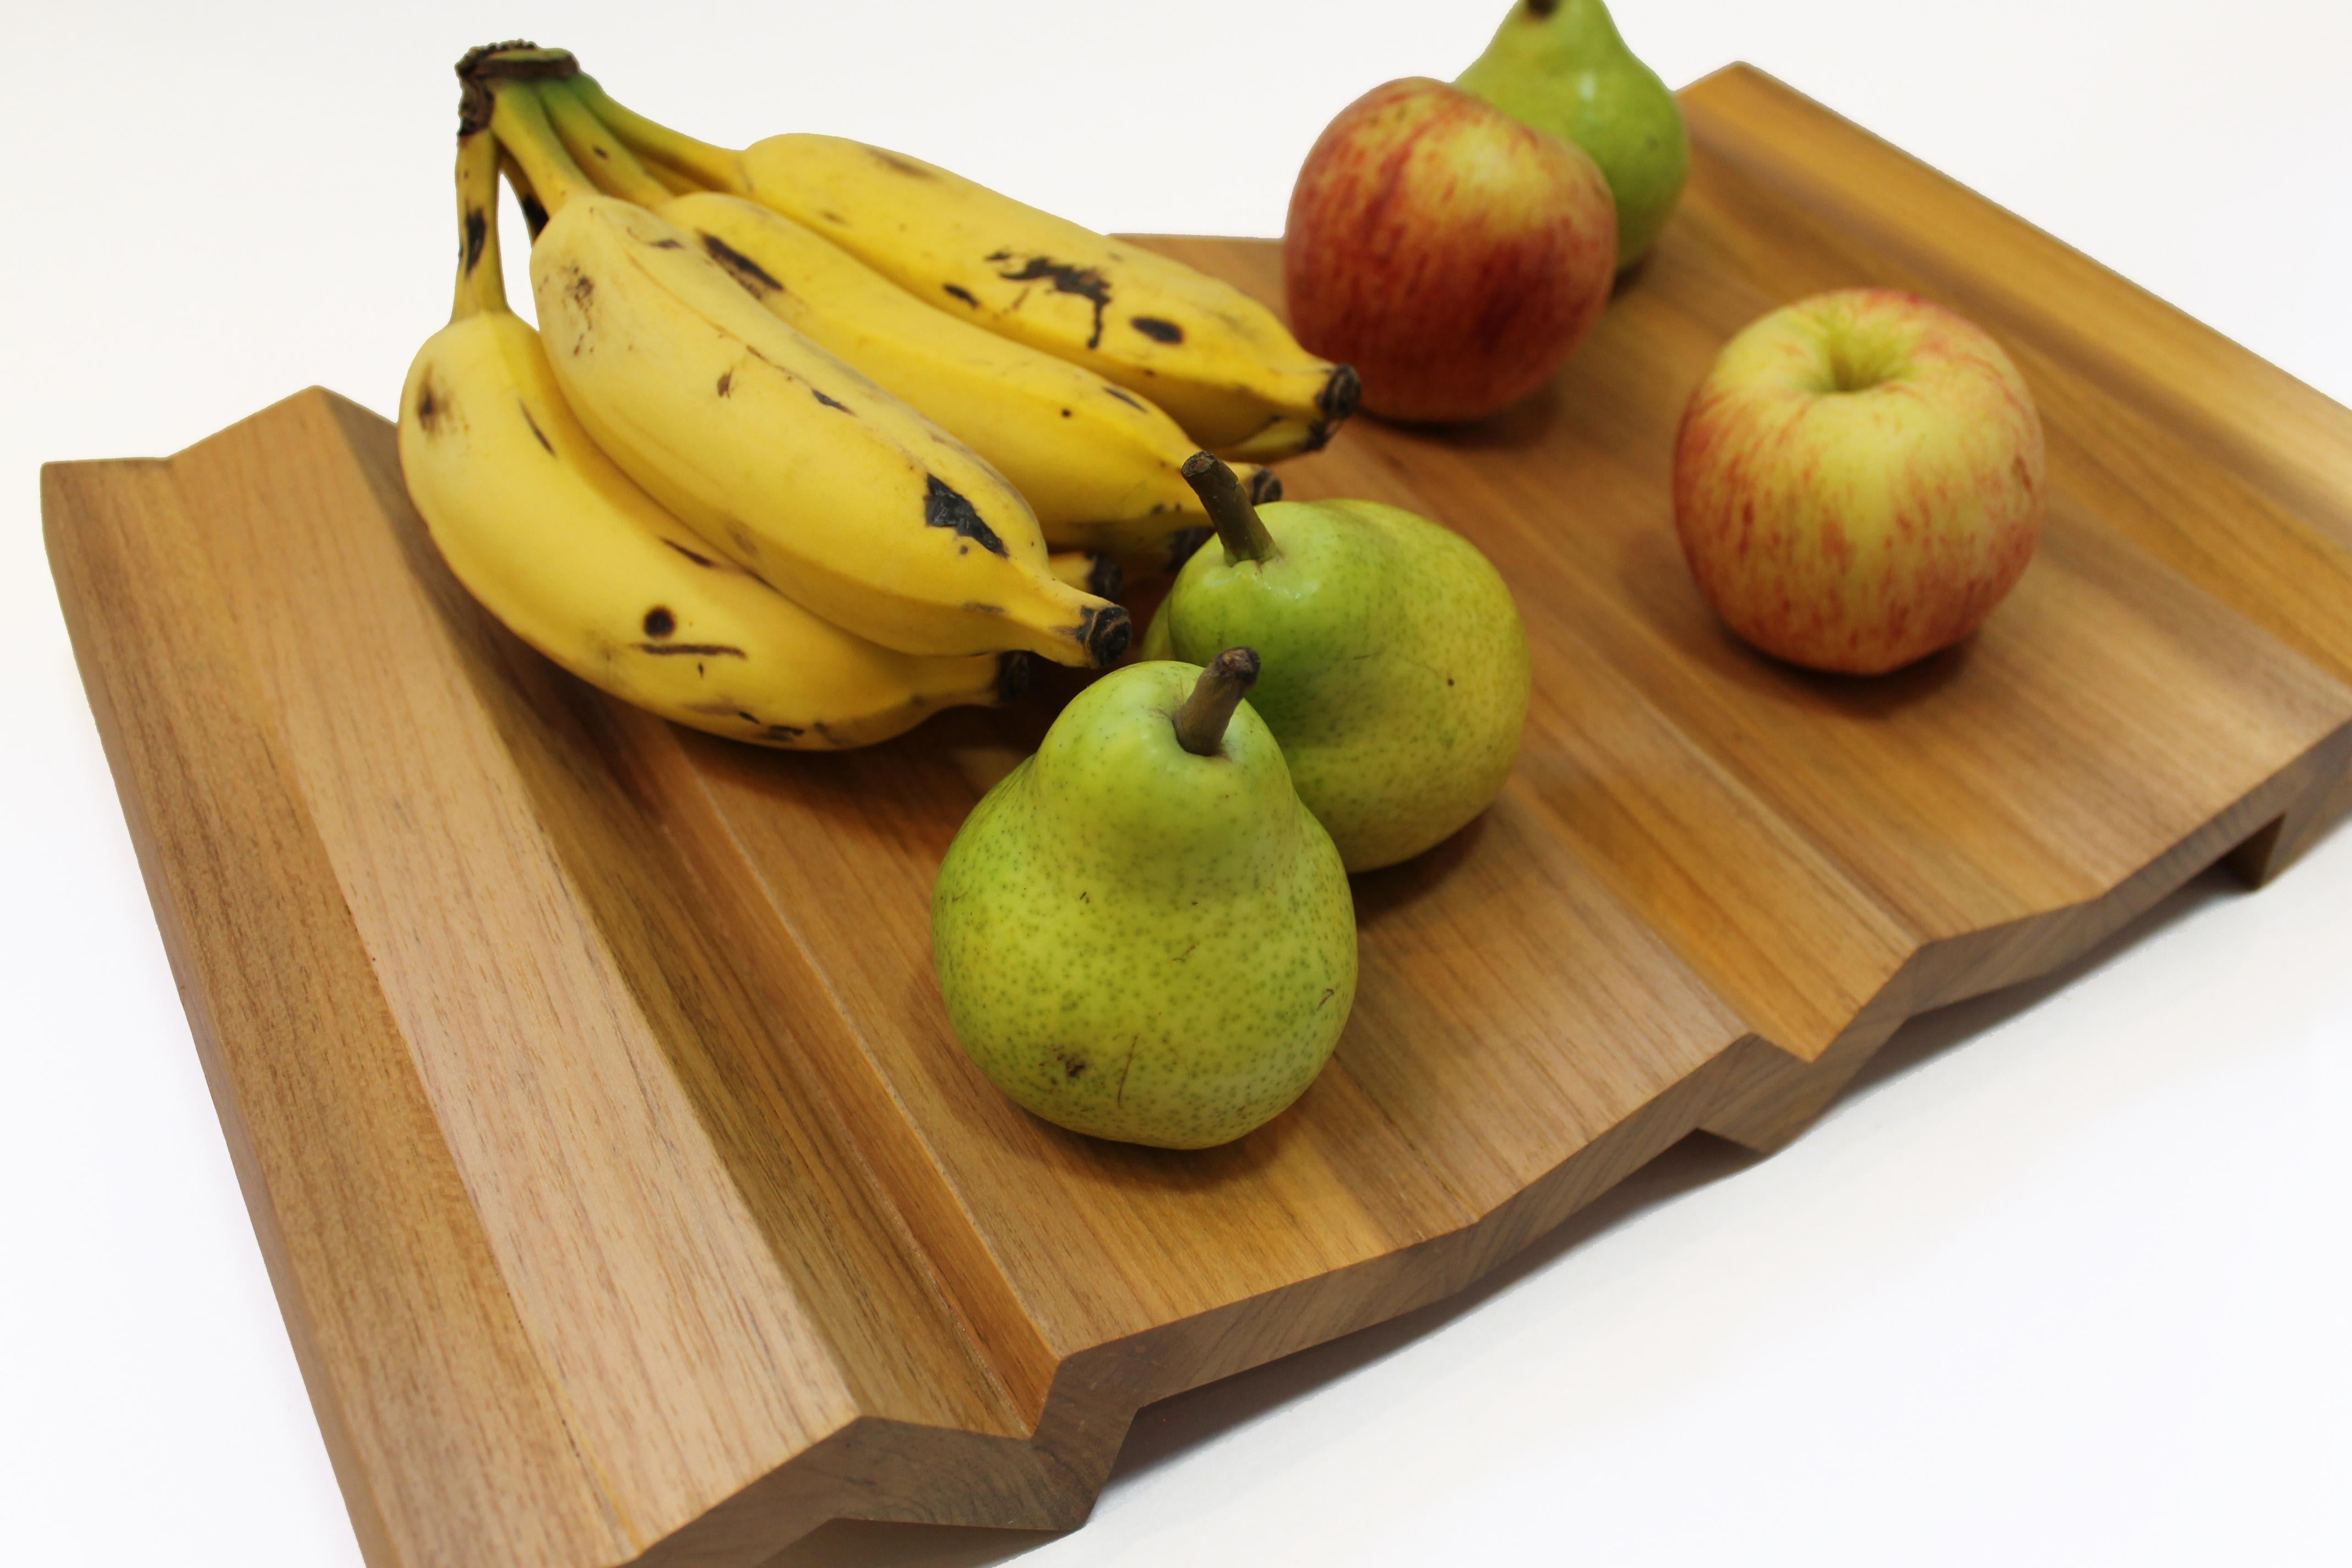 The Dobra fruit bowl, a word for “fold” in Portuguese, results from the deformation of a plan. The geometric distortion provides gaps between the base and upper surface, at the same time, creates spaces for storage and side handles for ease handling